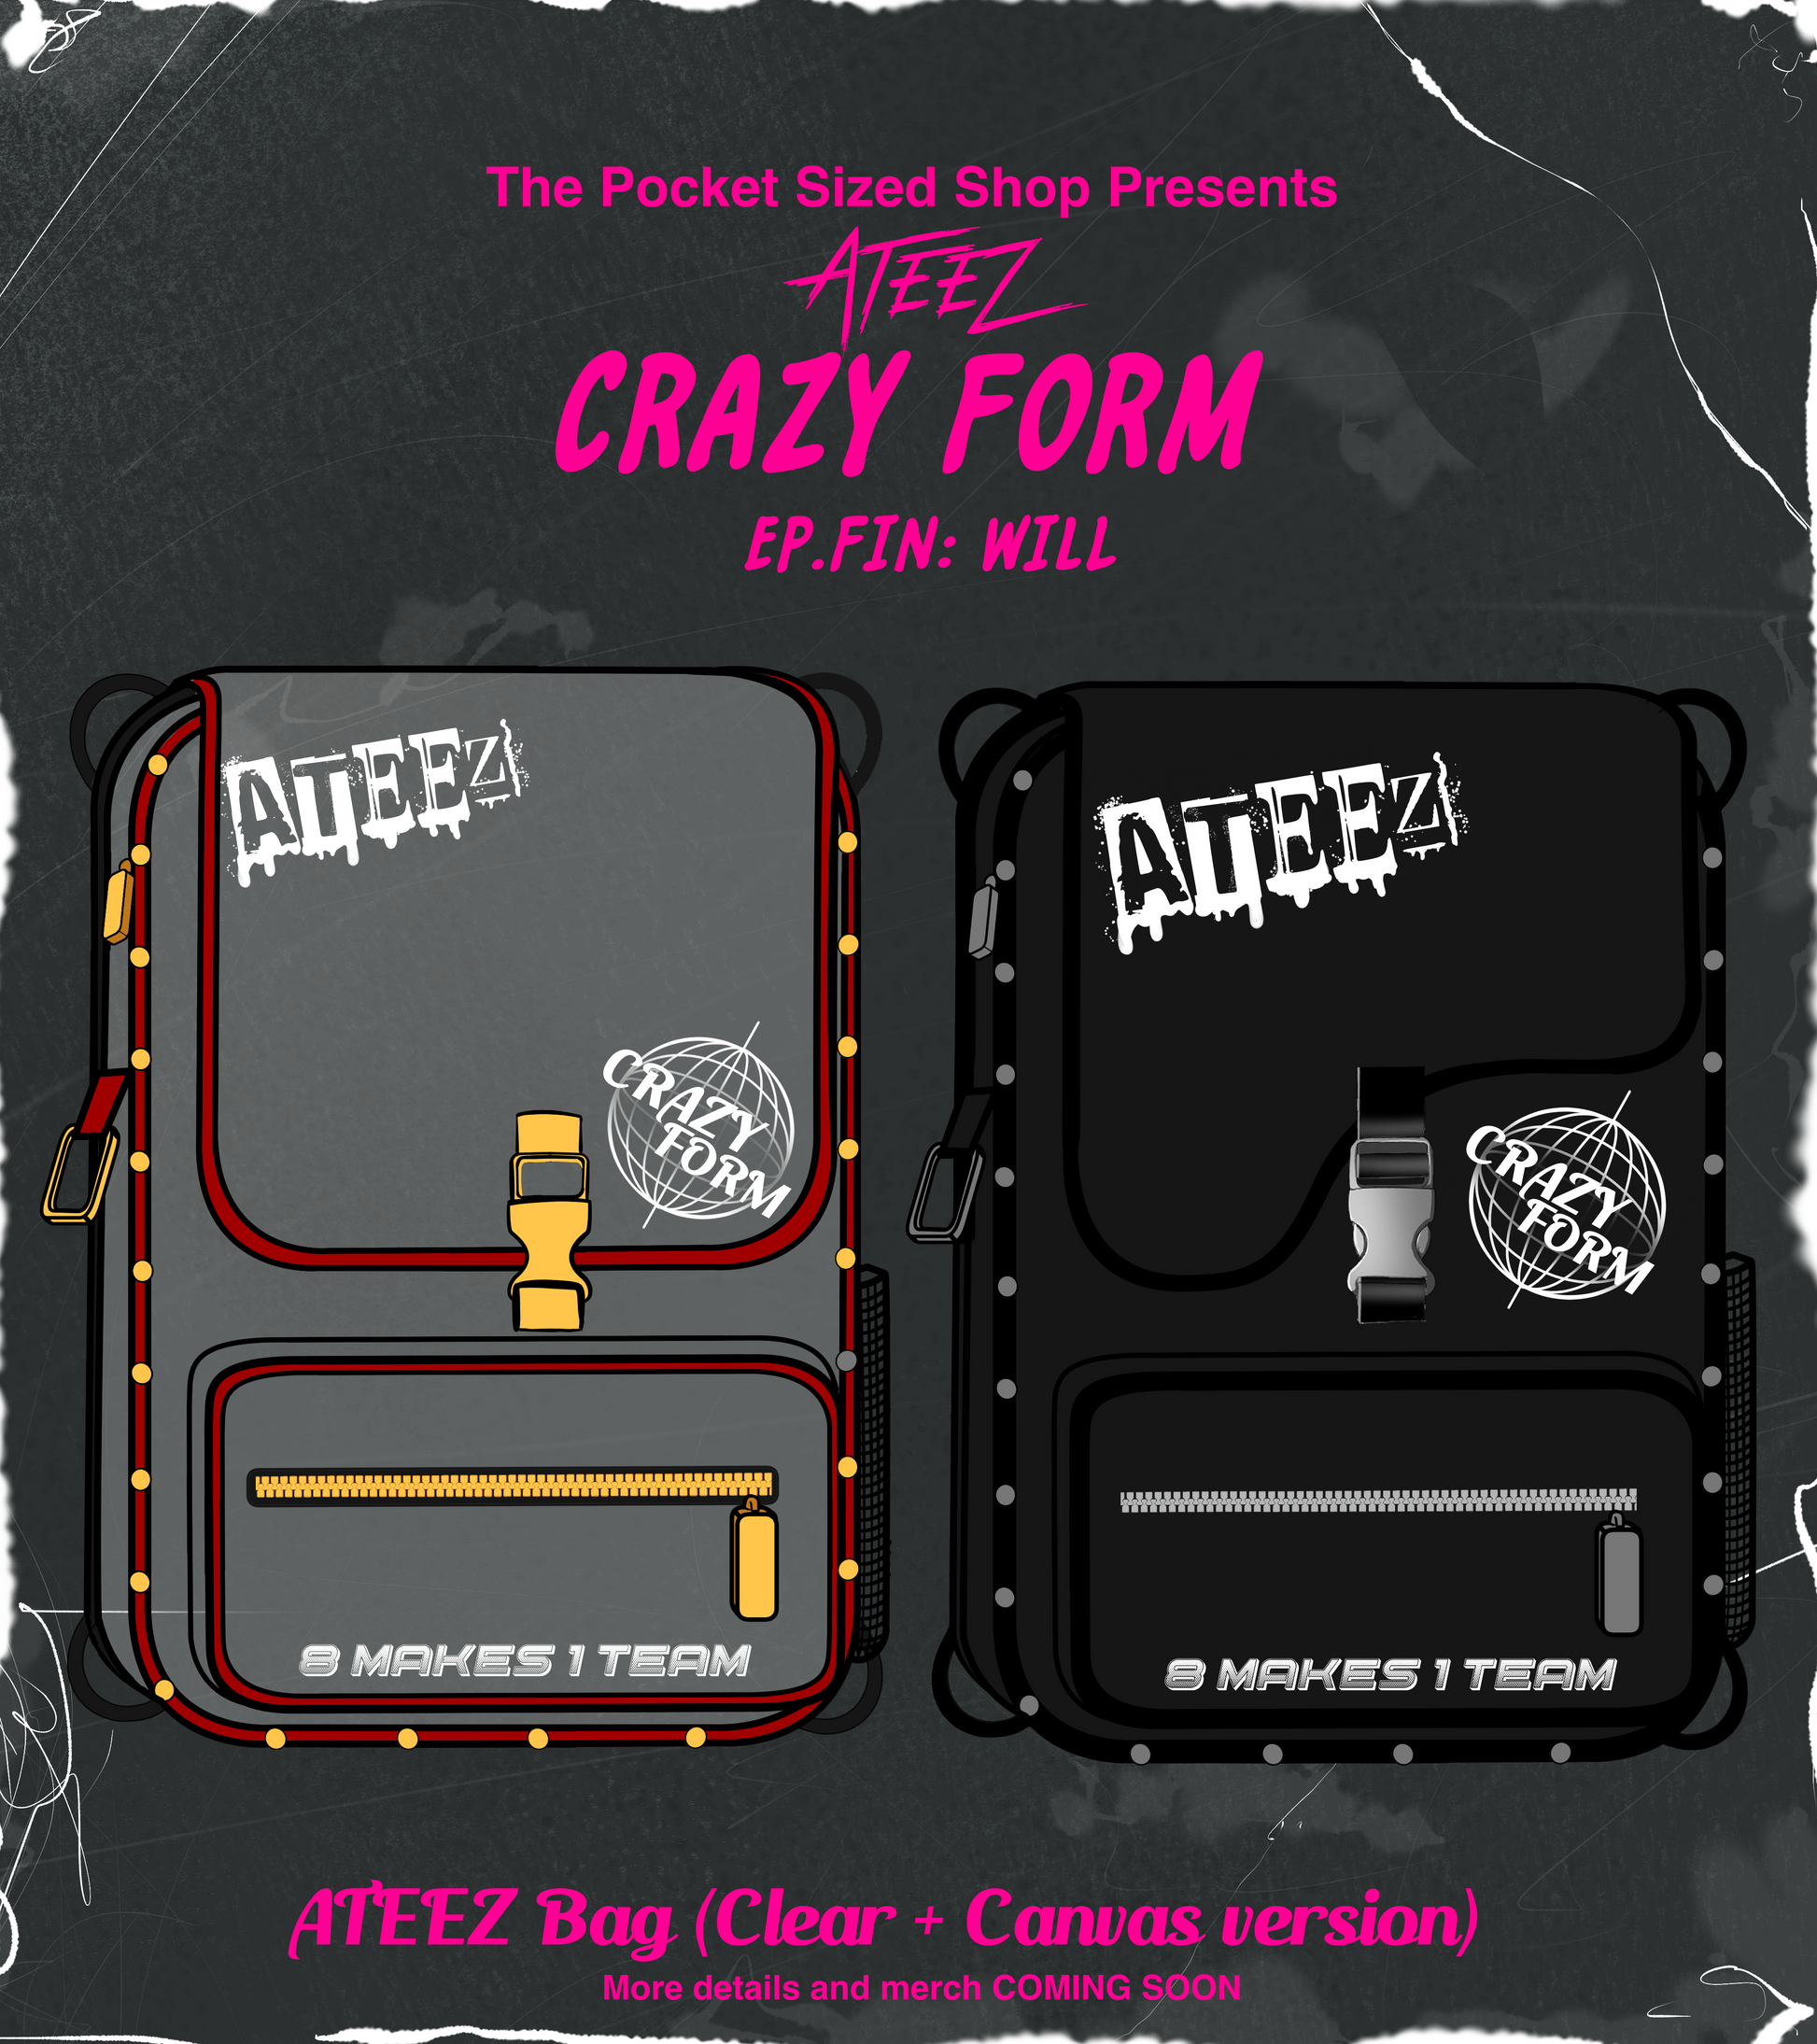 Explore our ATEEZ-inspired merch collection! Featuring the exclusive Crazy Form MV and EP.Fin:All album clear transparent jelly bag – perfect for concerts. Paired with our versatile black canvas bag, your ultimate stadium-ready companions for KPOP events. Limited stock available